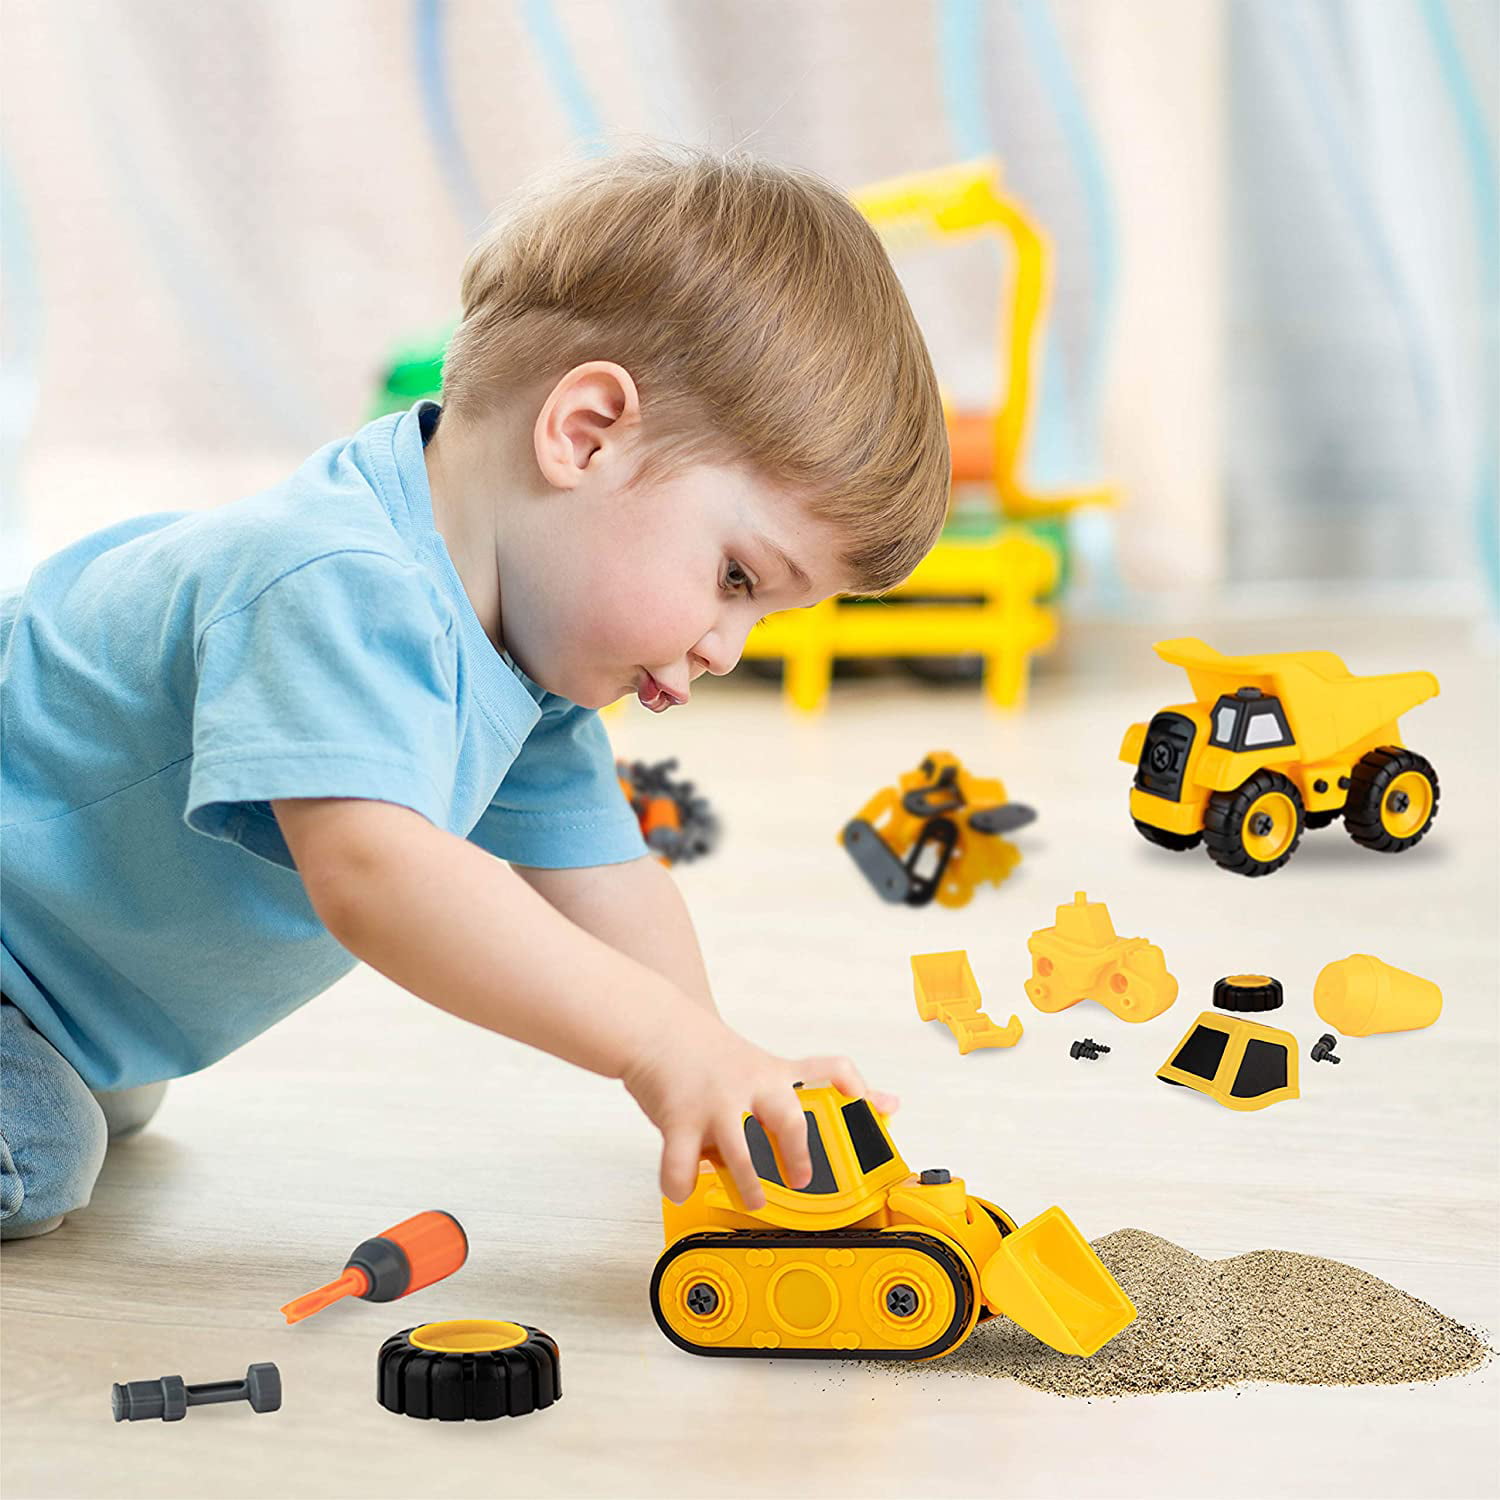 Advanced Play Constuction Dump Take Apart Truck Toys for Preschool Children Equipped with Play Power Tools for Kids Such as Electric Drill and Various Tools Moves and Rides On Its Own for Toddlers 